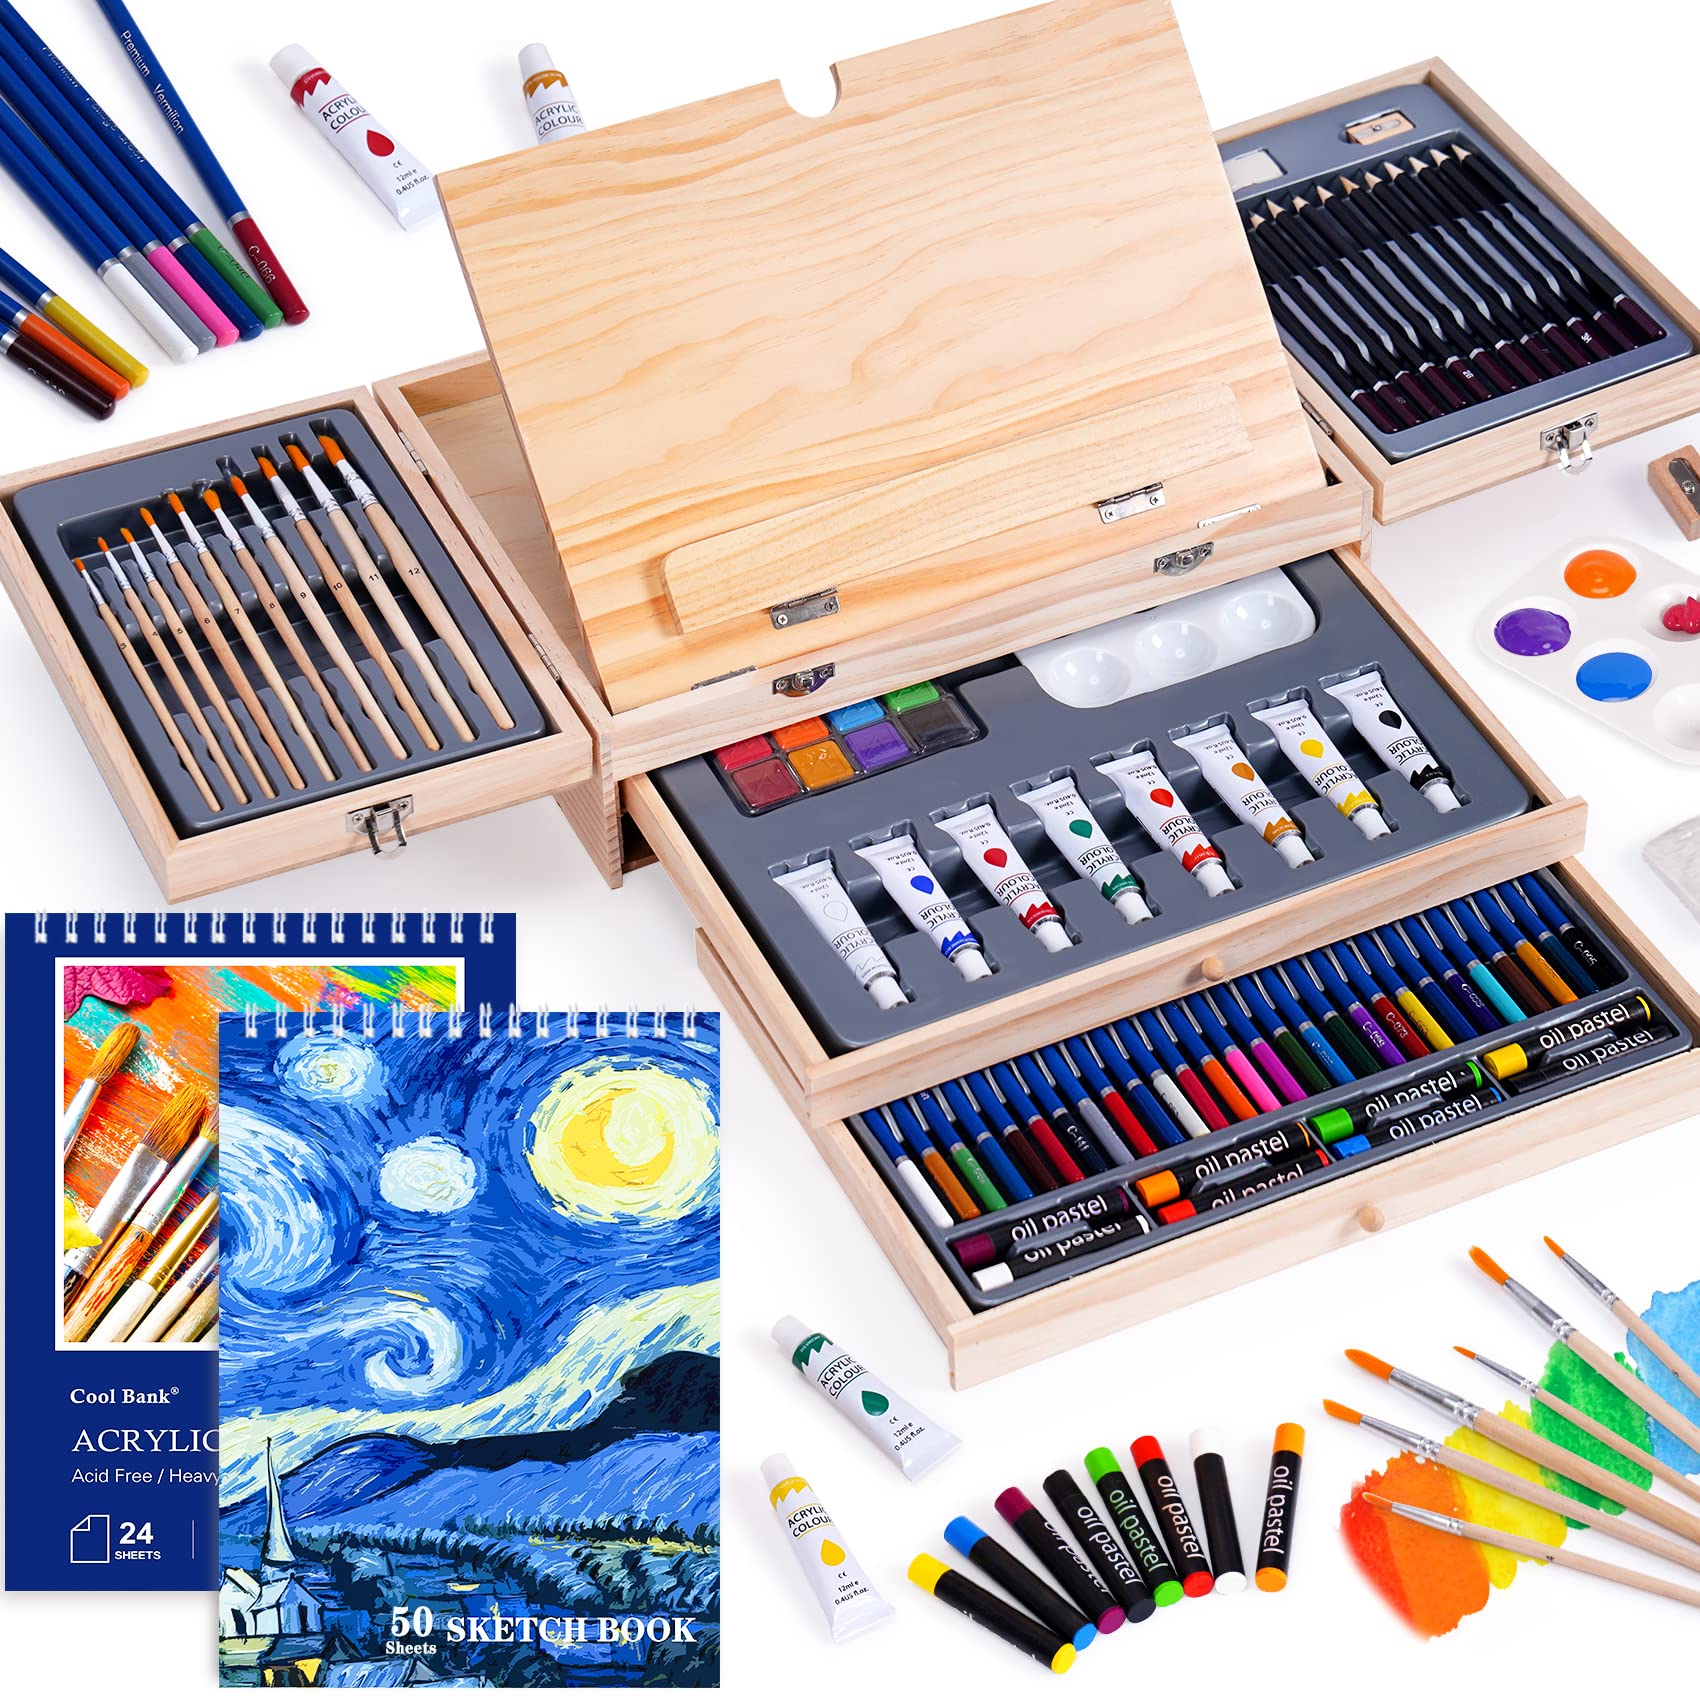 Paint Set,126 Piece Deluxe Art Set with 2 Drawing Pad, Art Supplies in  Portable Wooden Case- Creative Gift Box for Teens Adults Artist Beginners-  Deluxe Art Kit,Drawing Set 